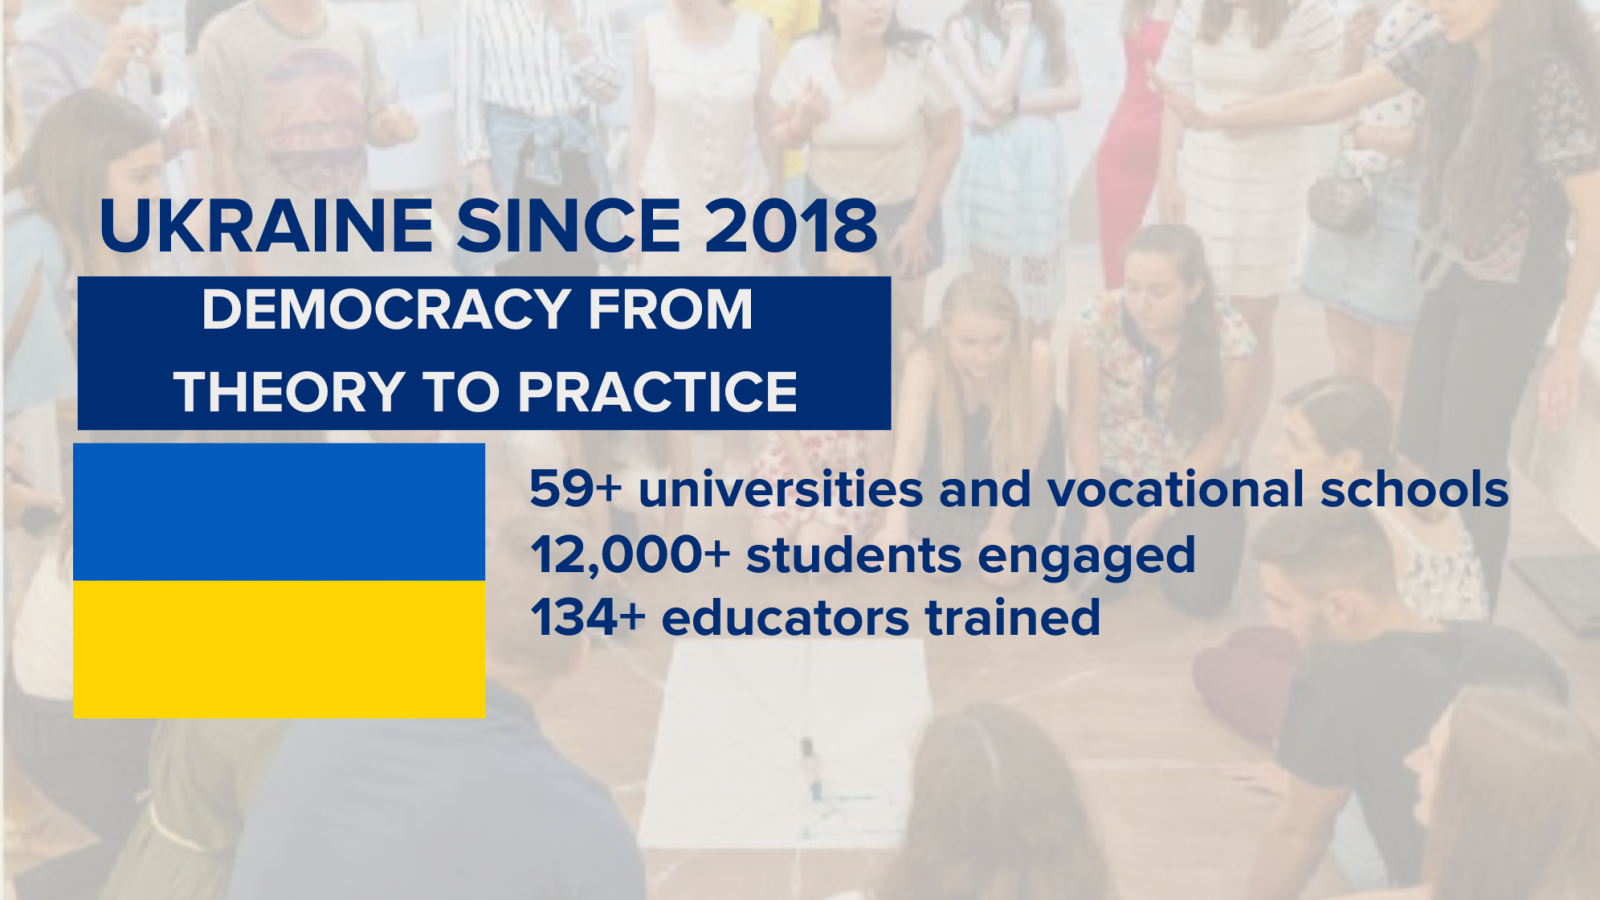 Ukraine Since 2018 Democracy from Theory to Practice, 59+ universities and vocational schools, 12,000 + Students Engaged, 134+ Educators trained